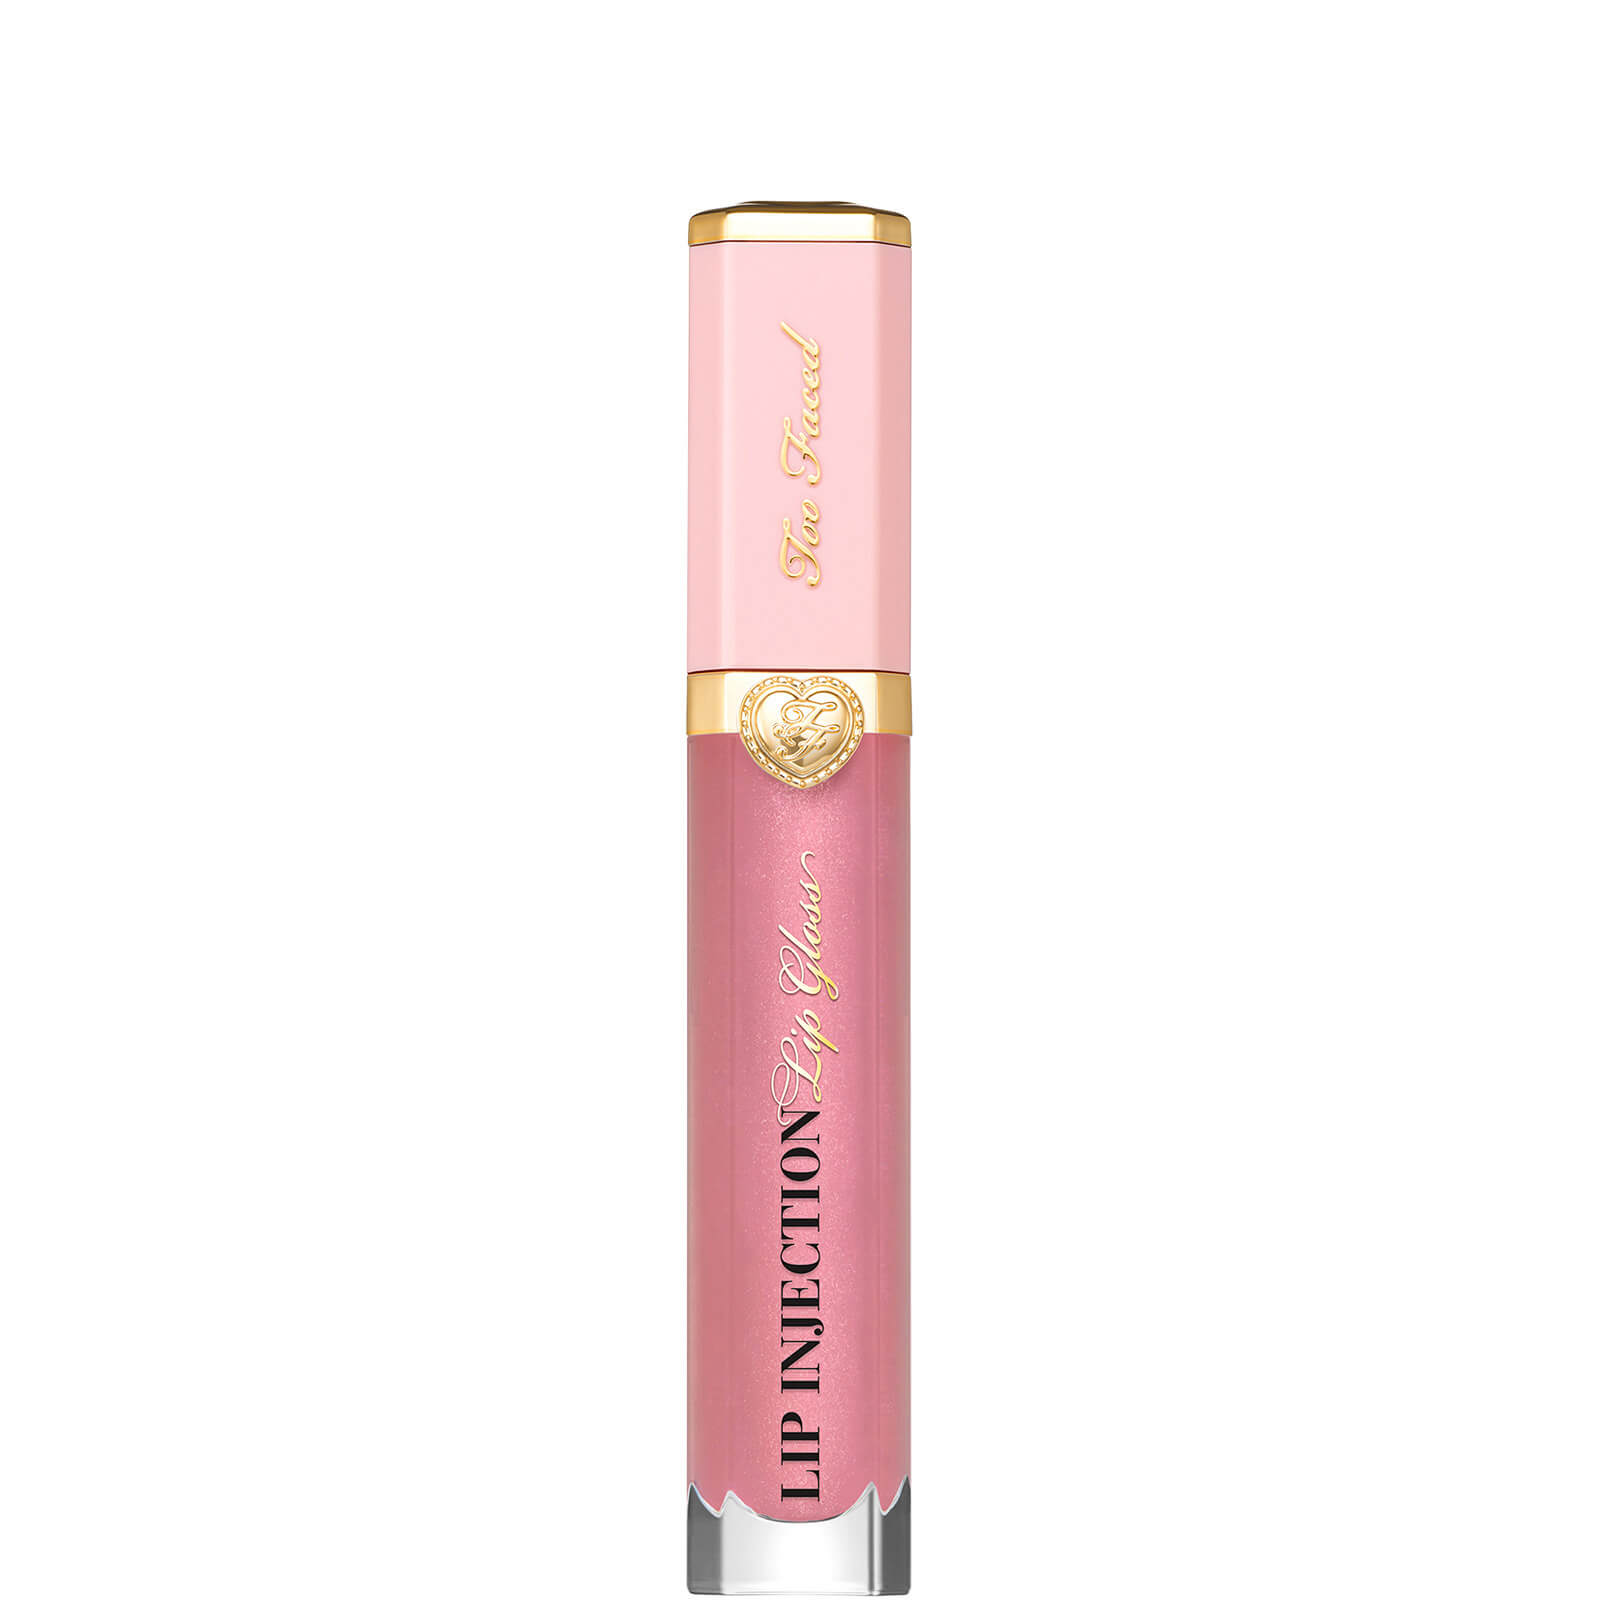 Too Faced Lip Injection Power Plumping Lip Gloss (Various Shades) - Just Friends